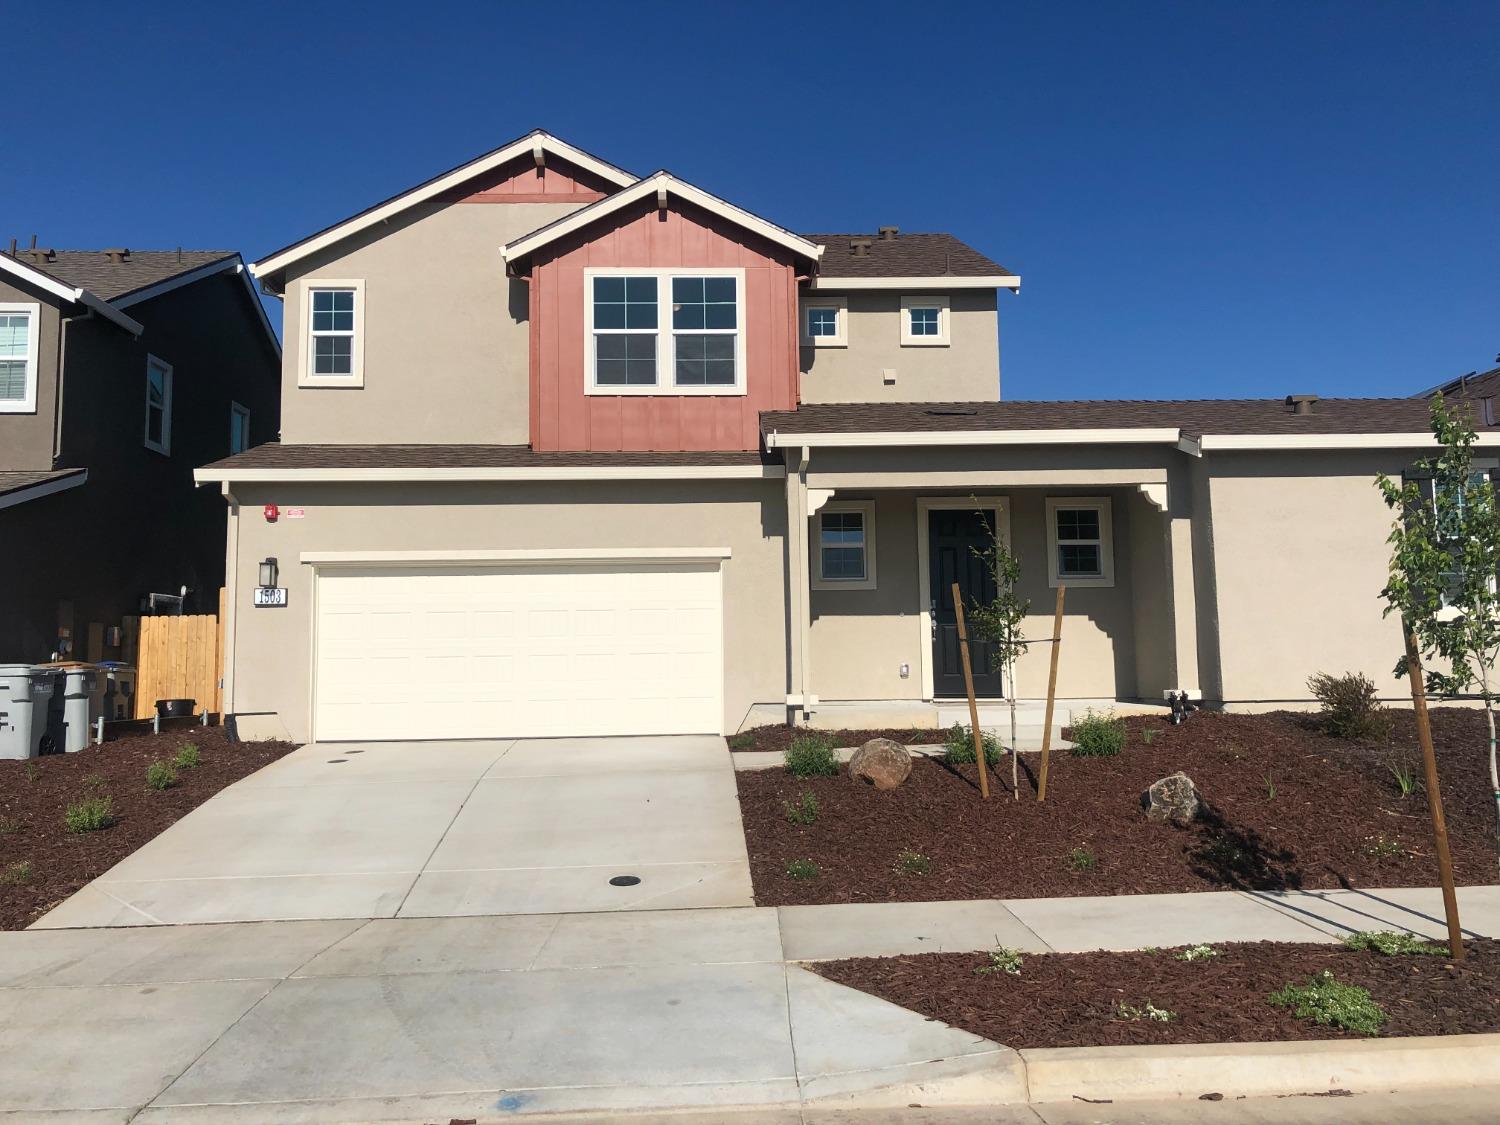 Photo of 1503 Scotty Wy in Winters, CA